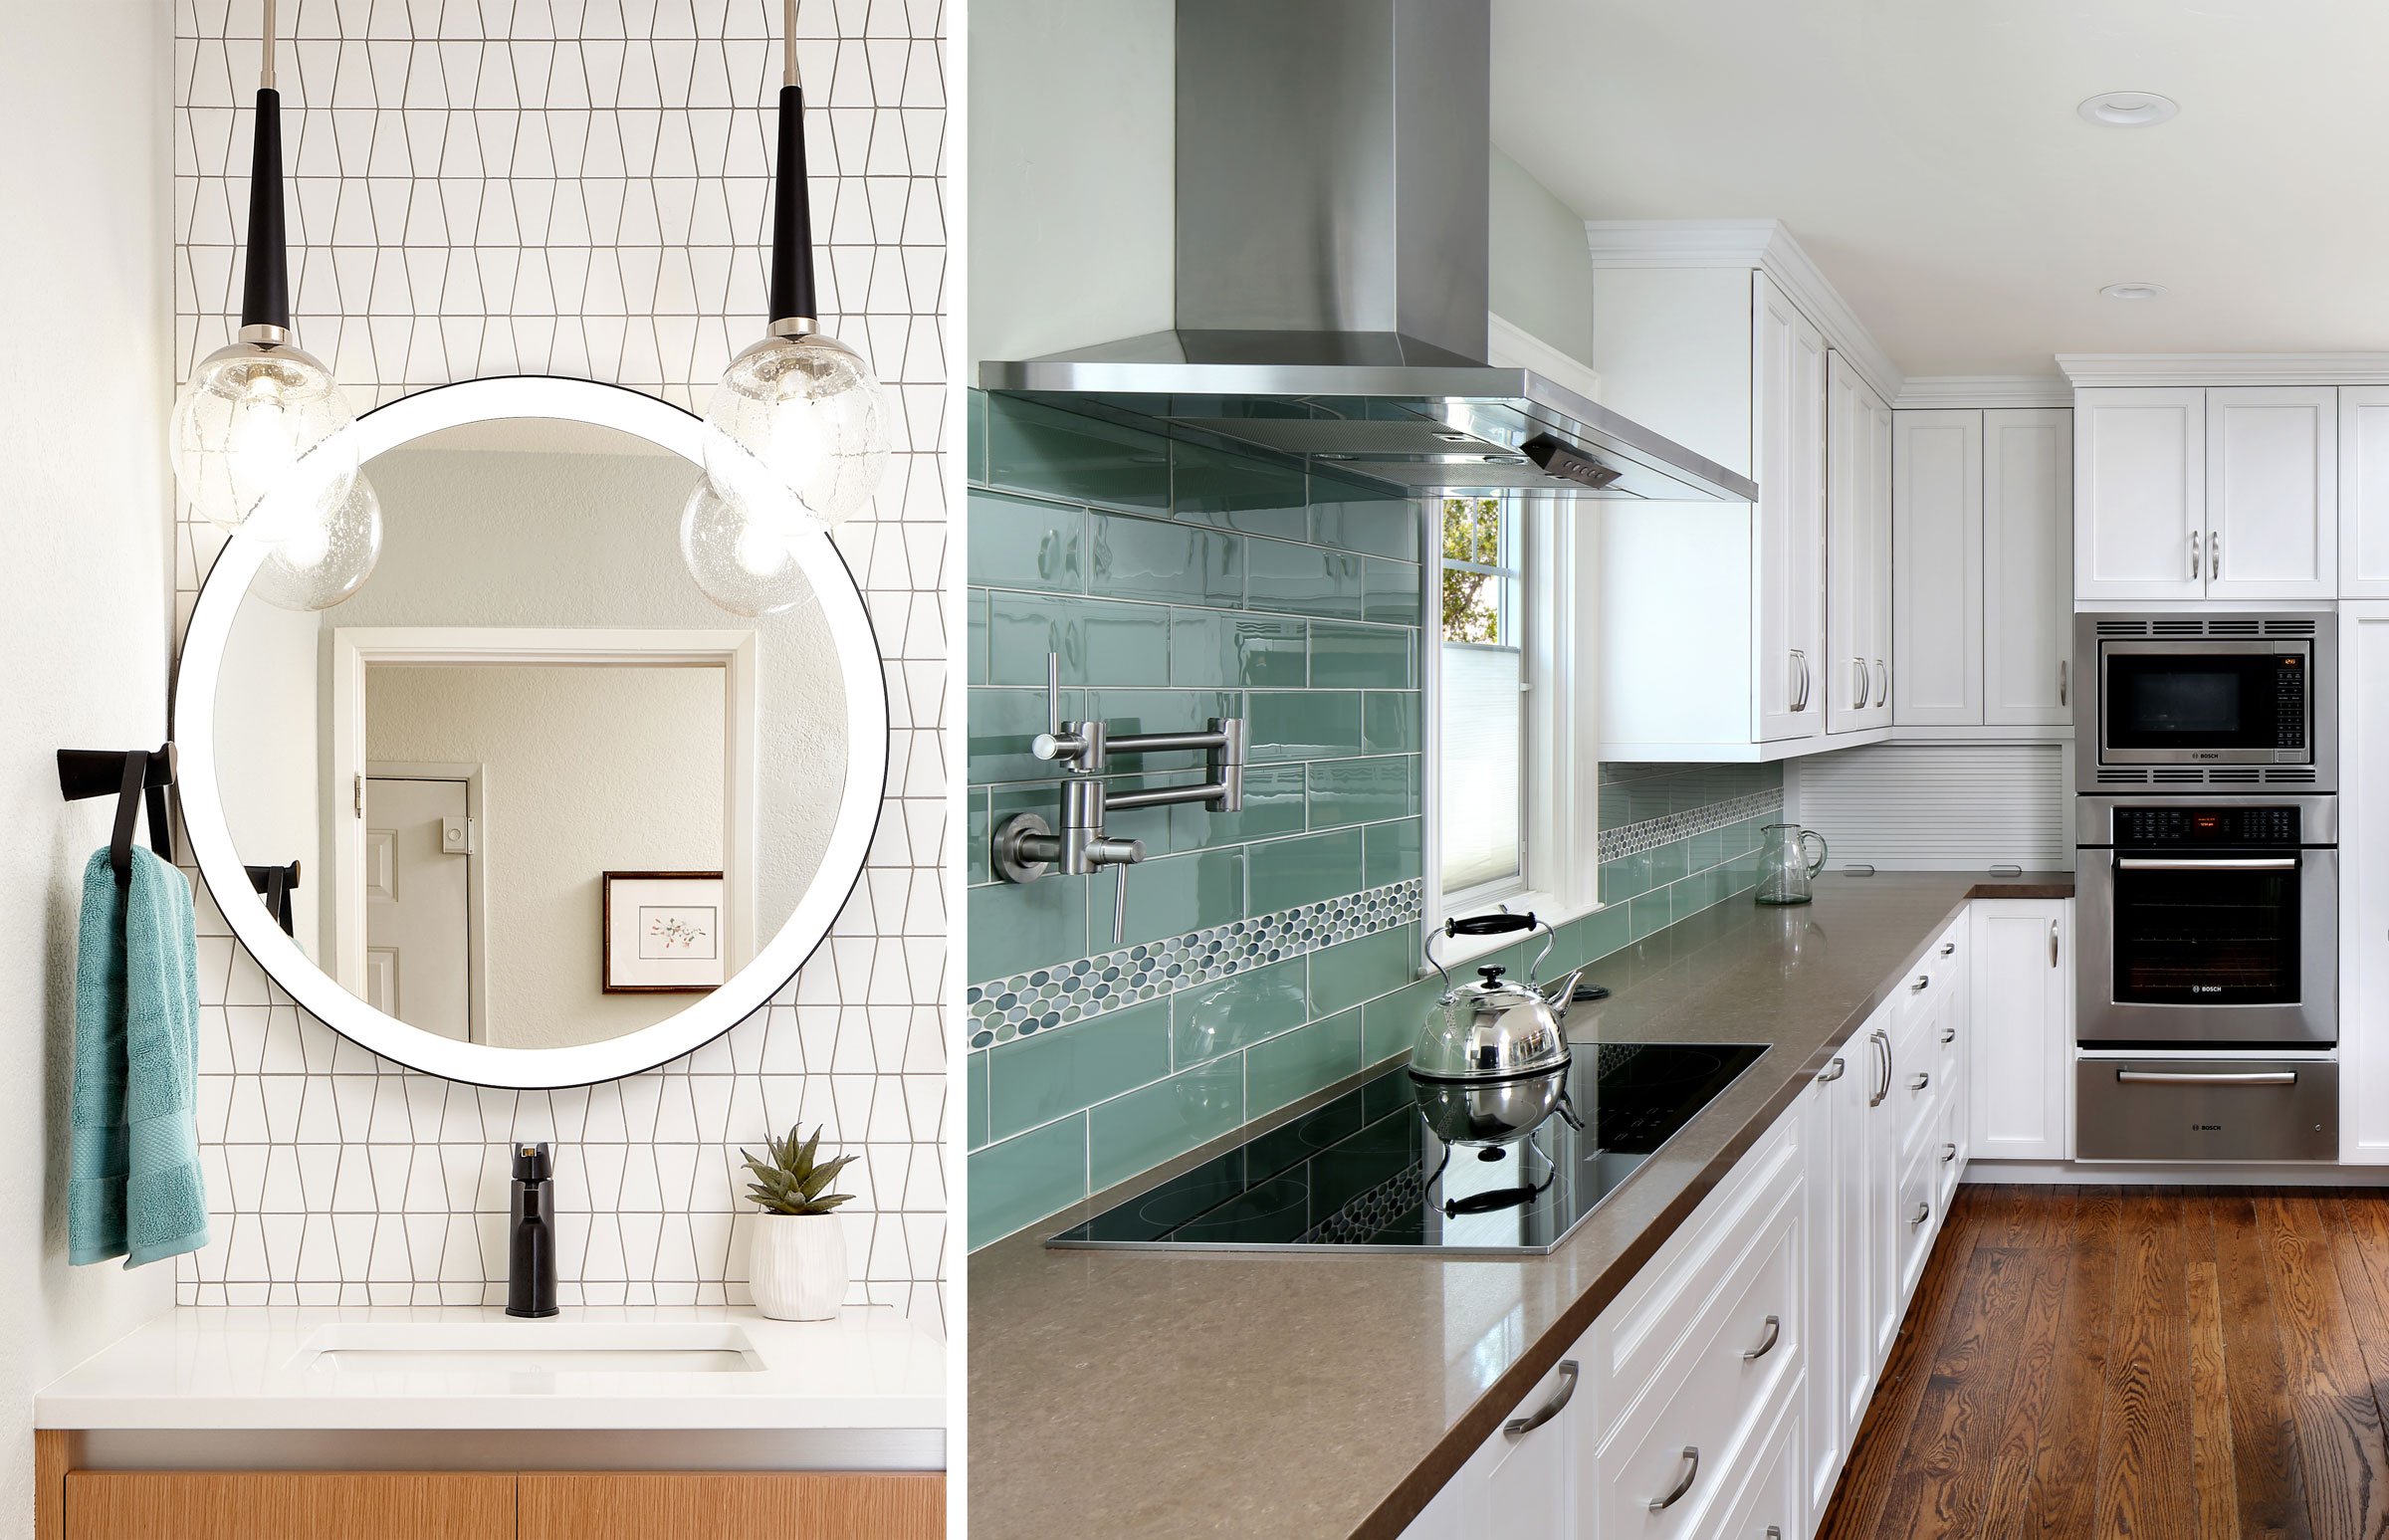 Collage of white bathroom sink and kitchen with blue backsplash